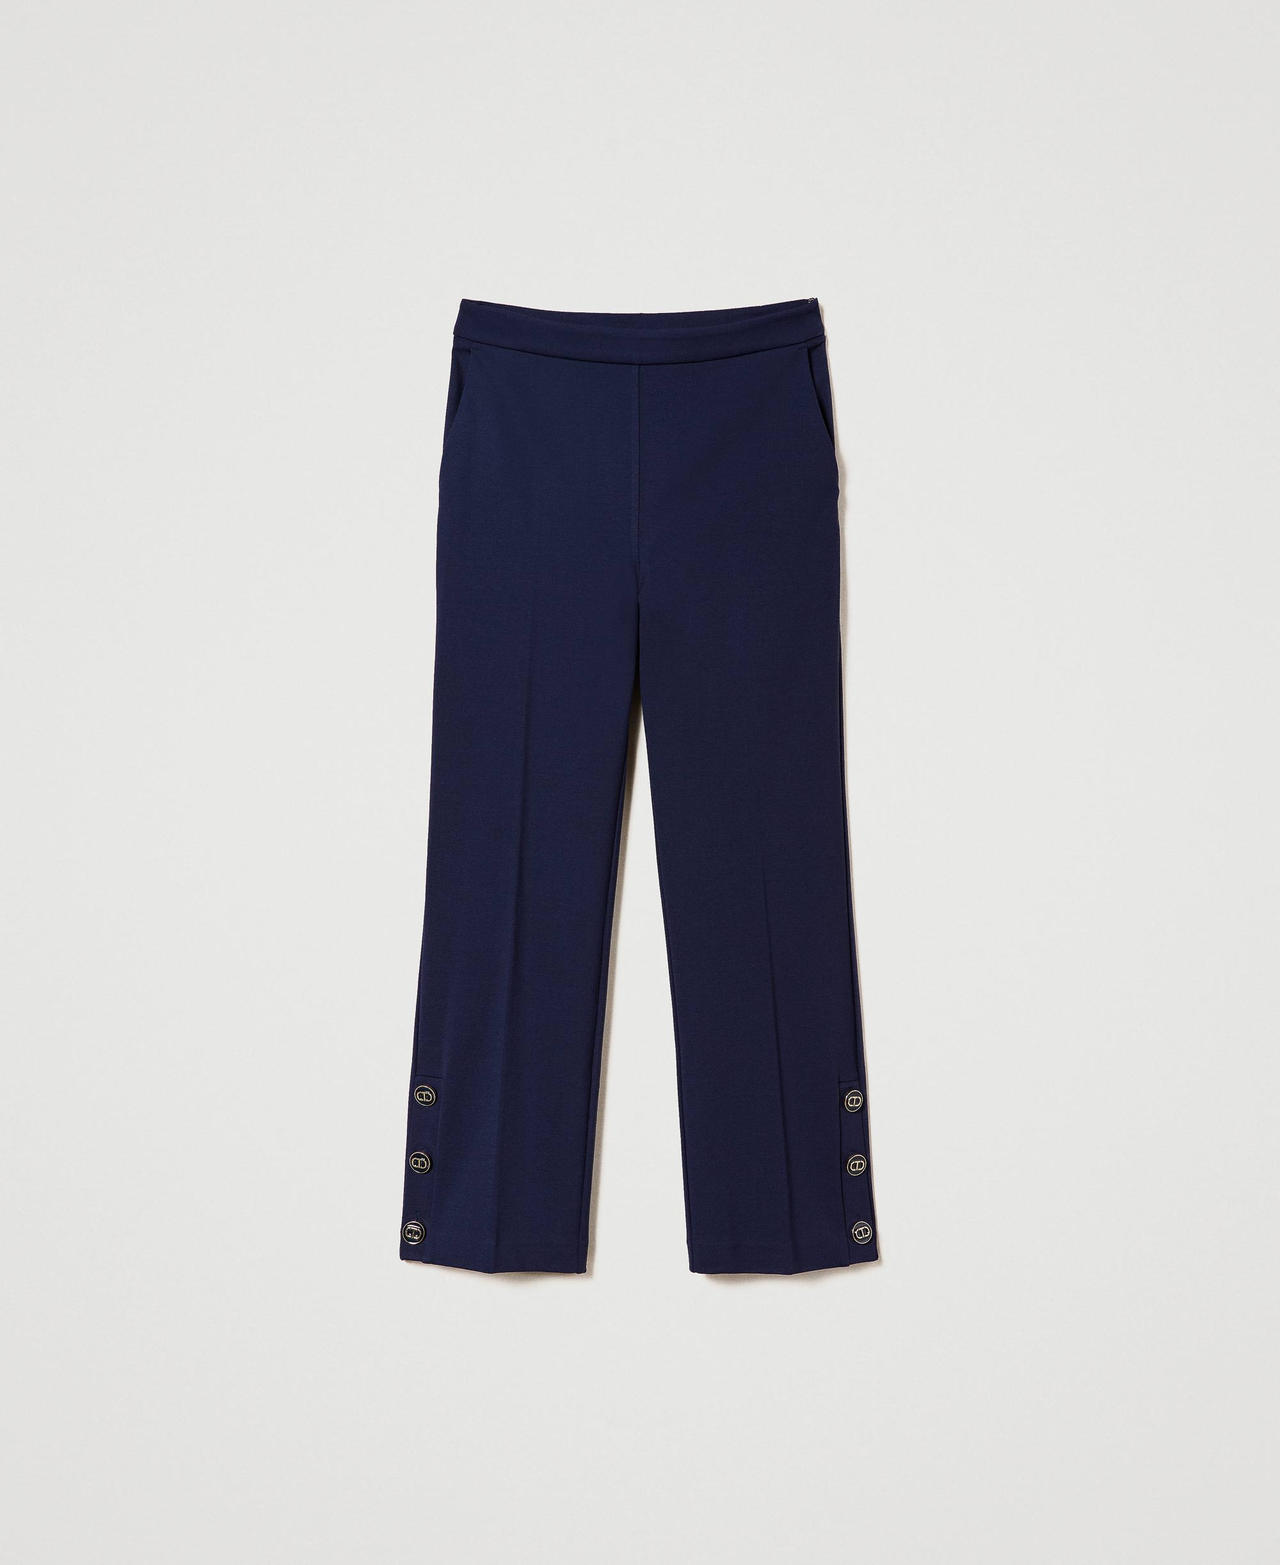 Pantalones cropped con botones Oval T Azul Midnight Mujer 241TP2273-0S